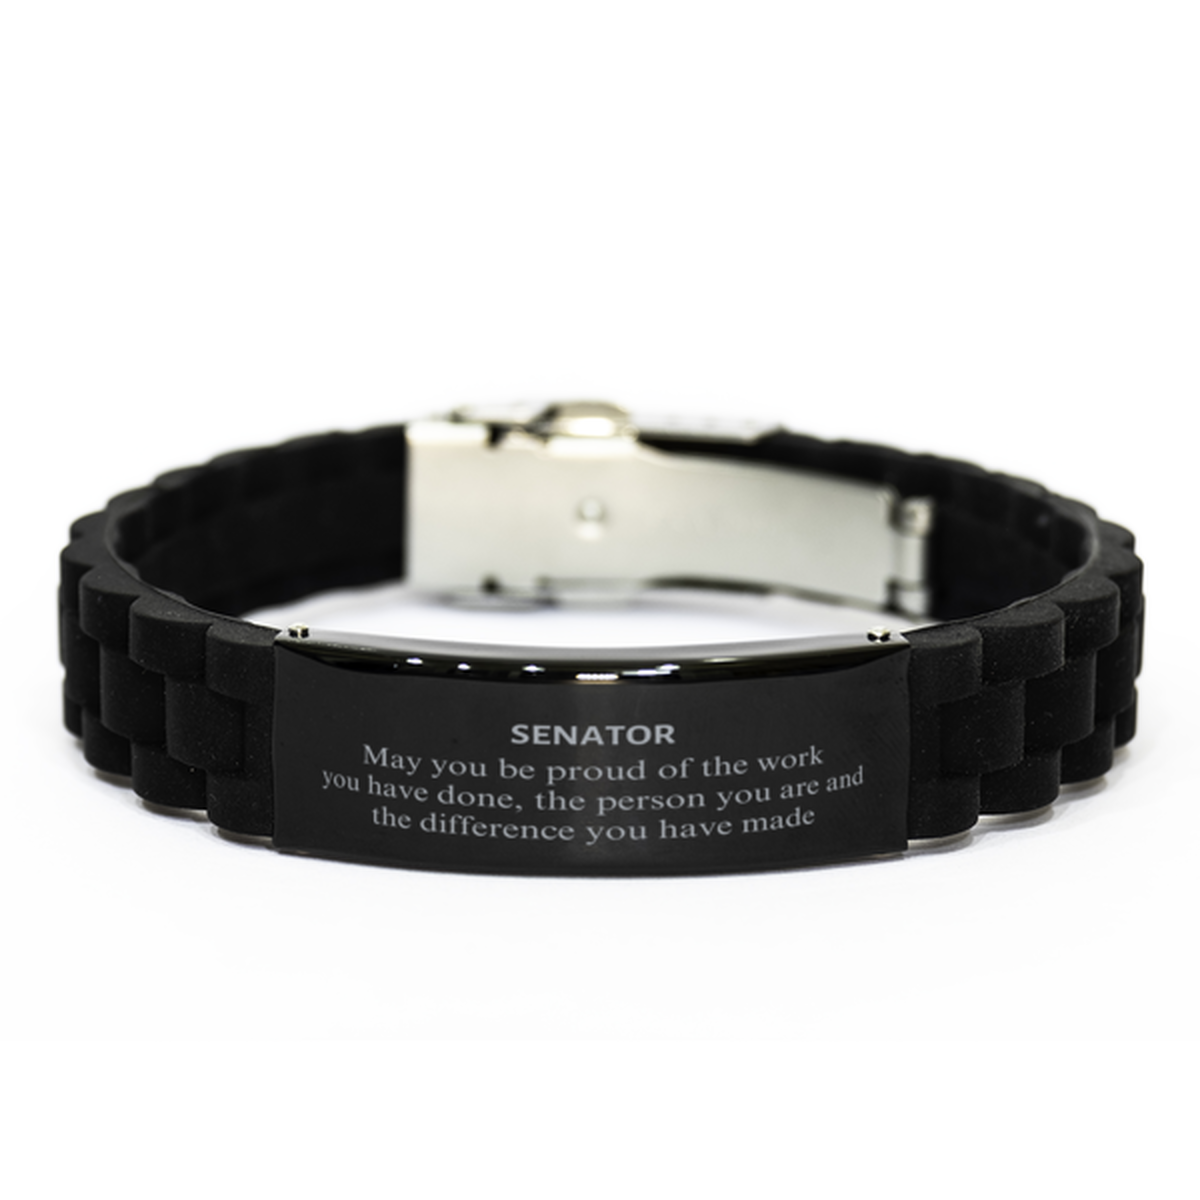 Senator May you be proud of the work you have done, Retirement Senator Black Glidelock Clasp Bracelet for Colleague Appreciation Gifts Amazing for Senator